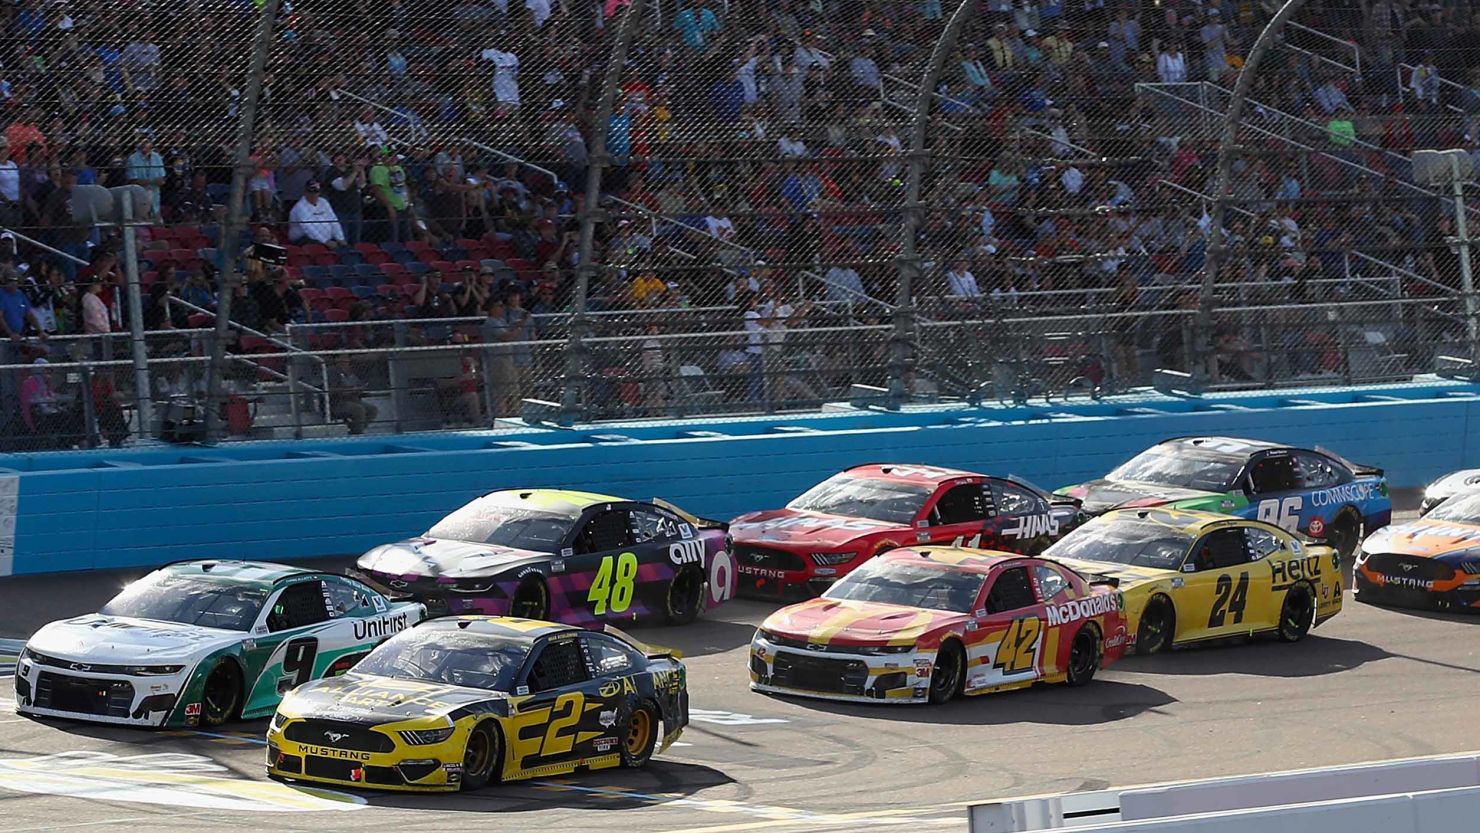 NASCAR's most recent Cup race was in Phoenix on March 8.